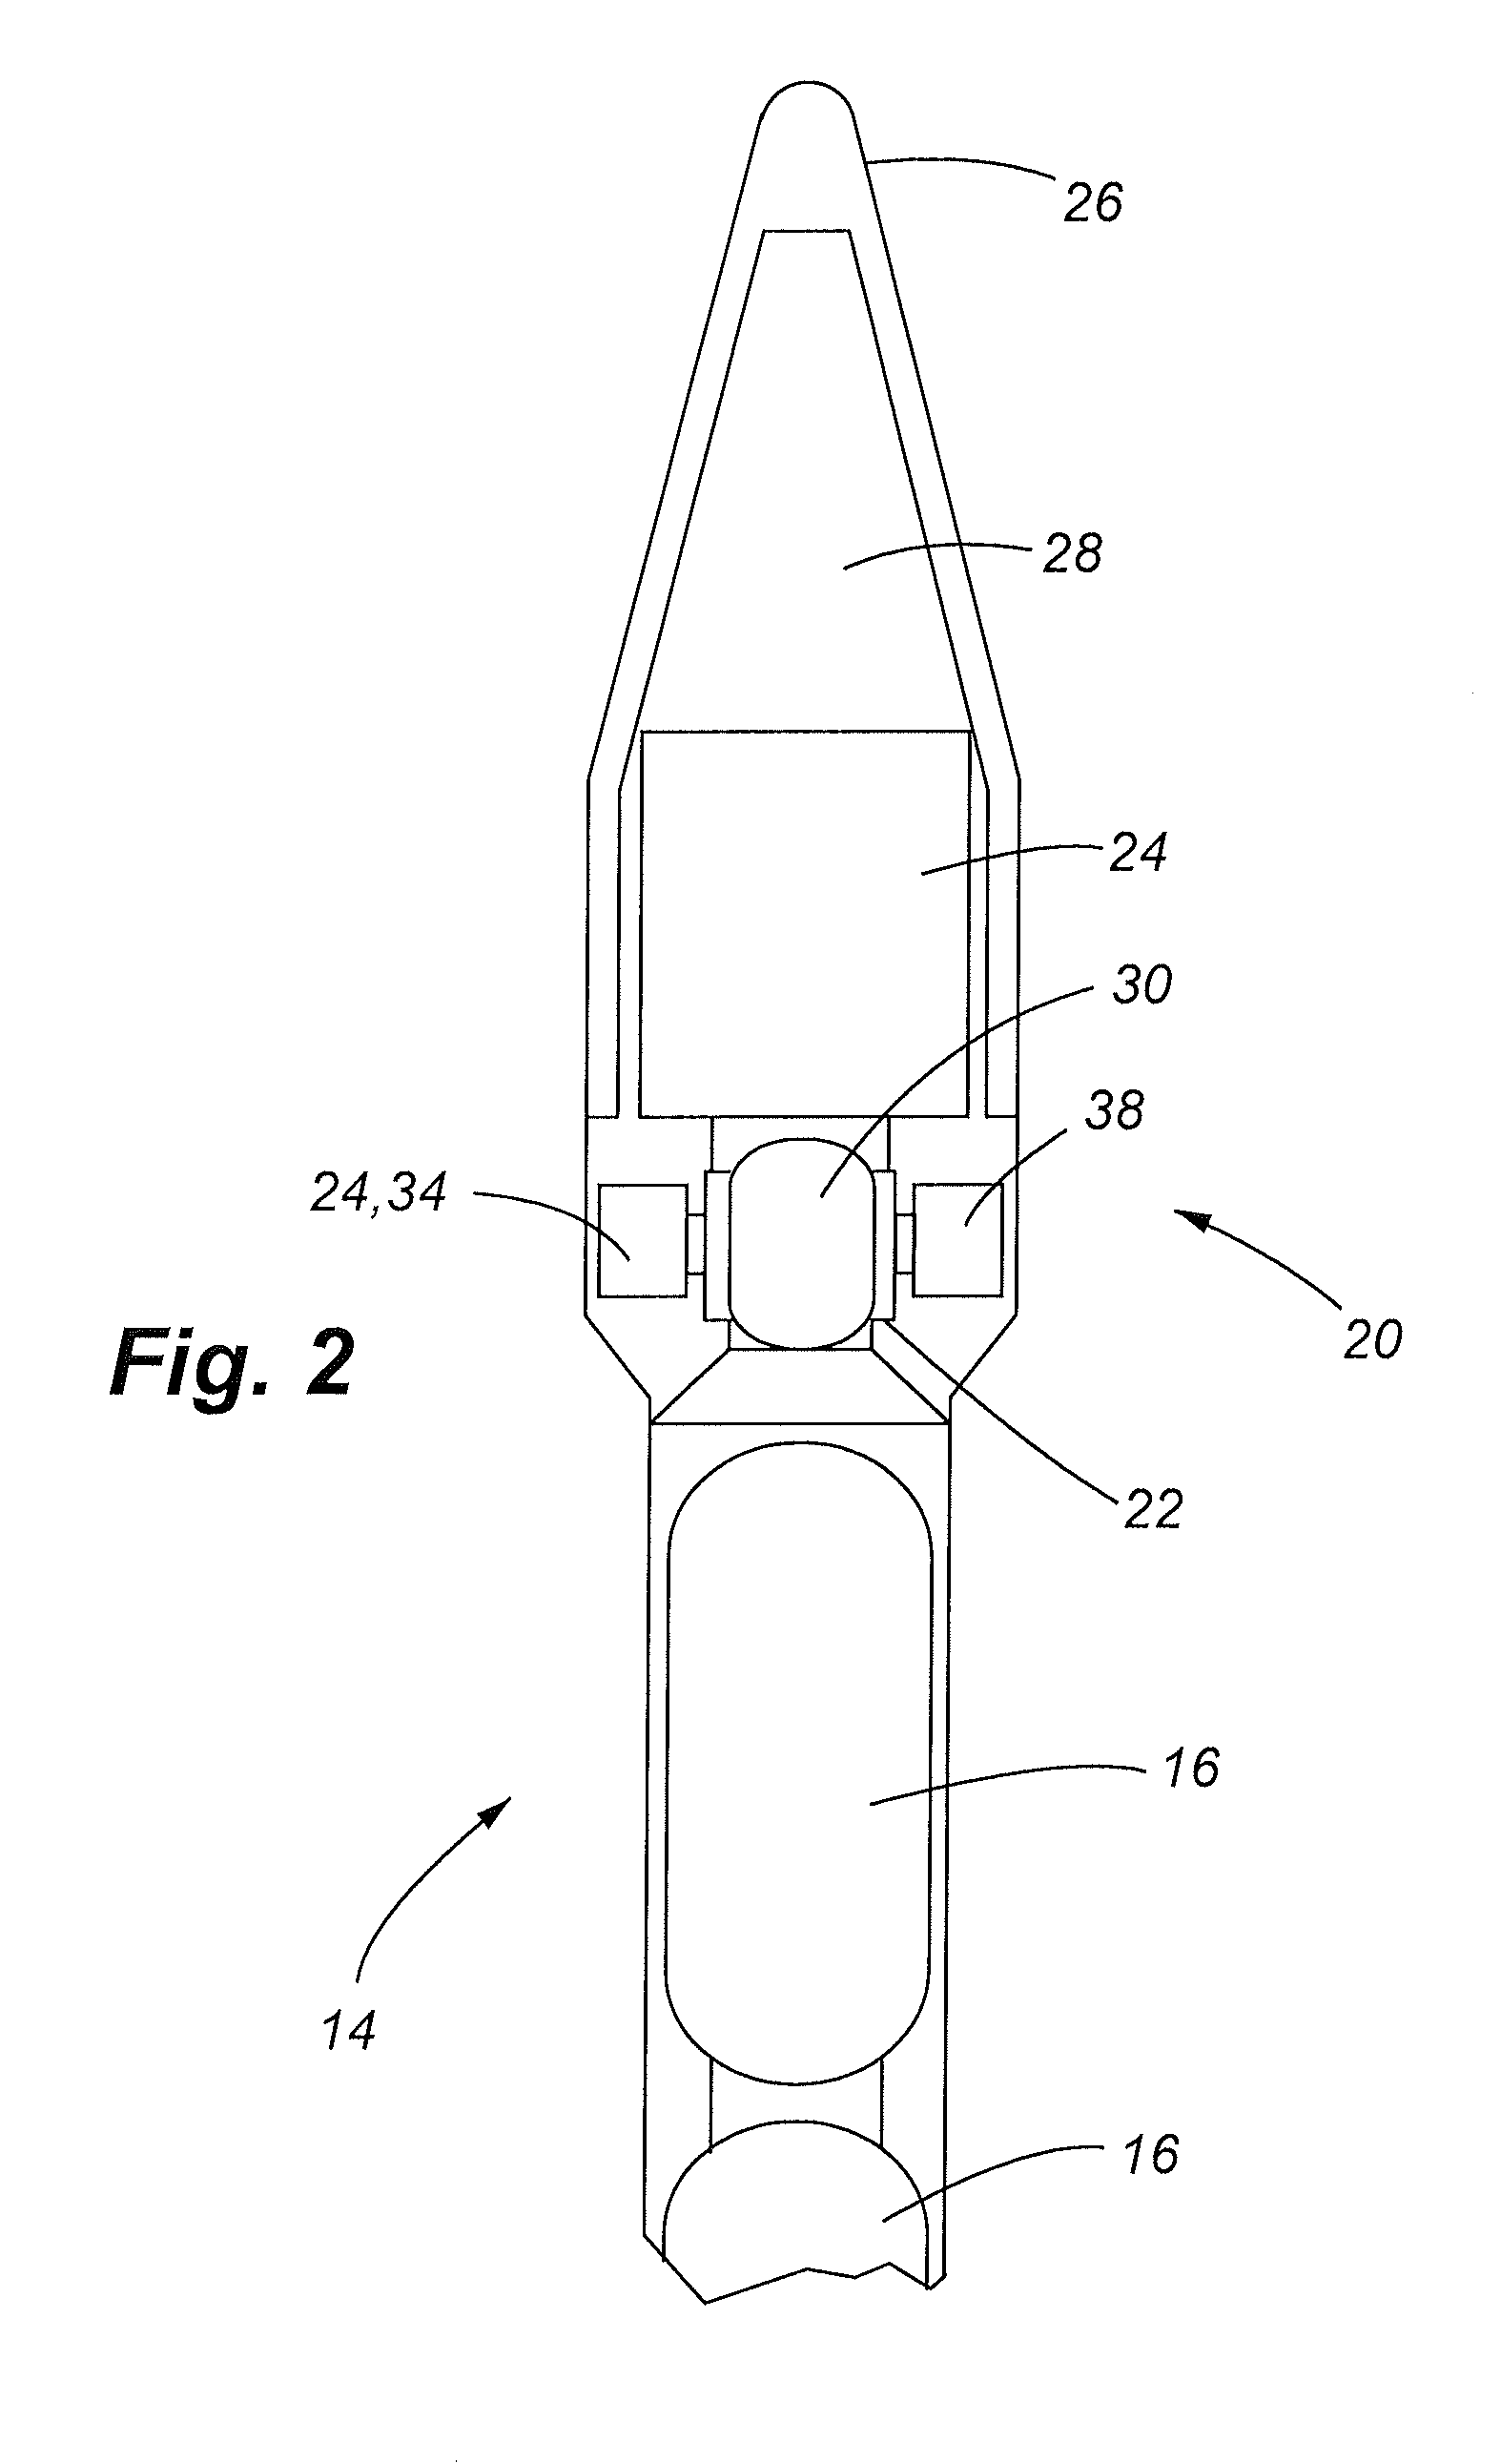 Apparatus and method of transferring and utilizing residual fuel of a launch vehicle upper stage